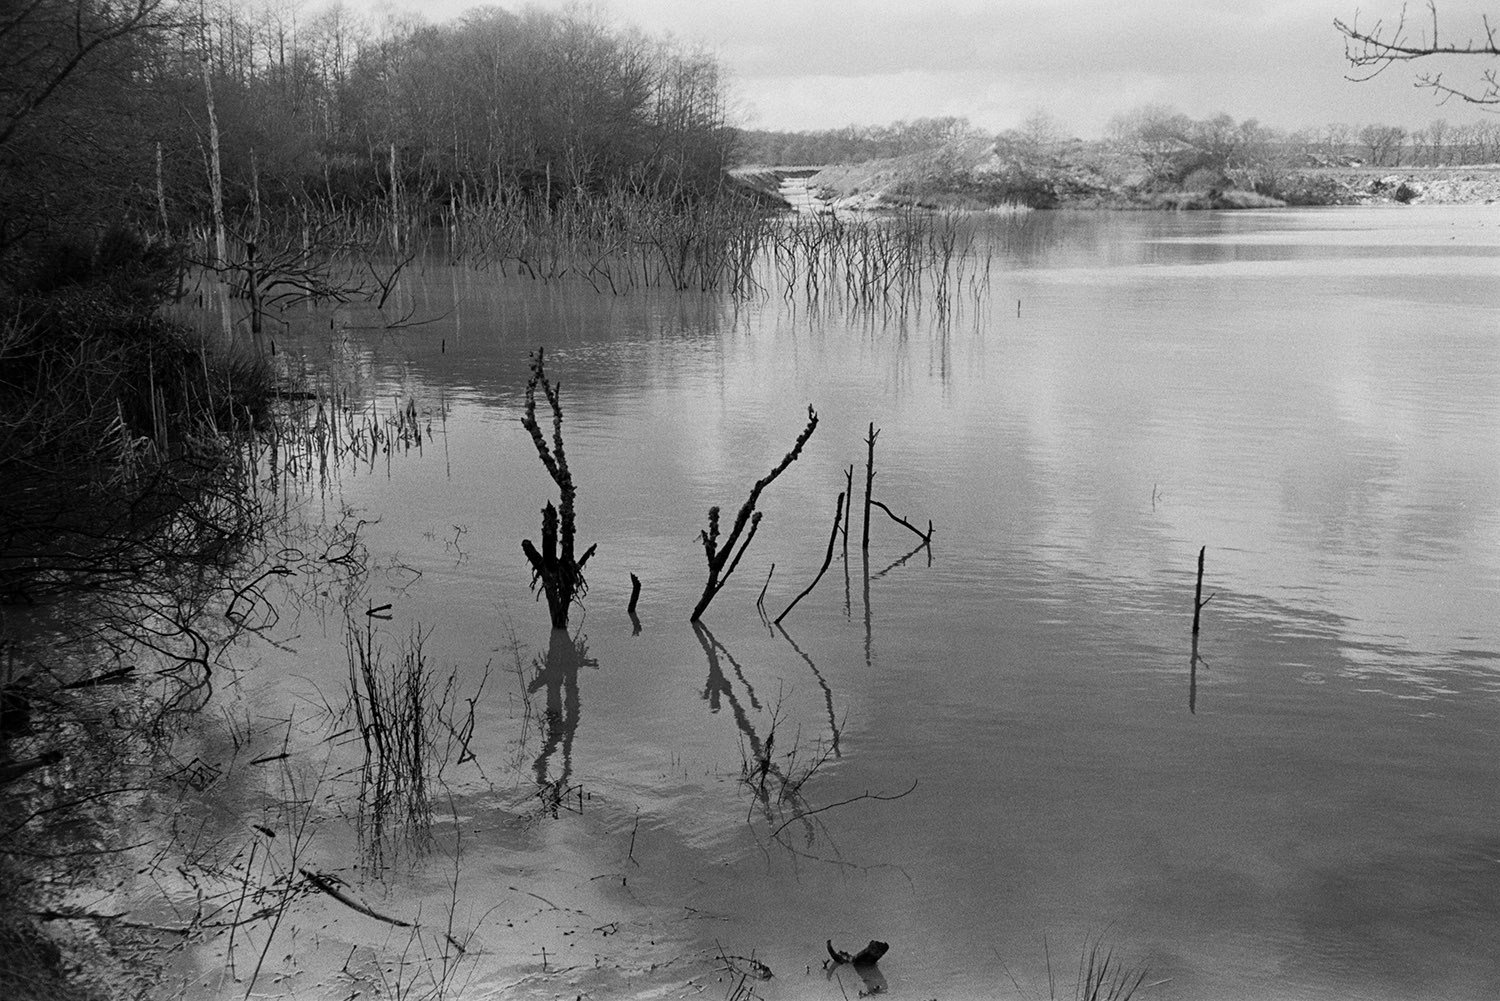 A pond or pool at North Devon Clay Pit, Meeth. Branches are in the water.